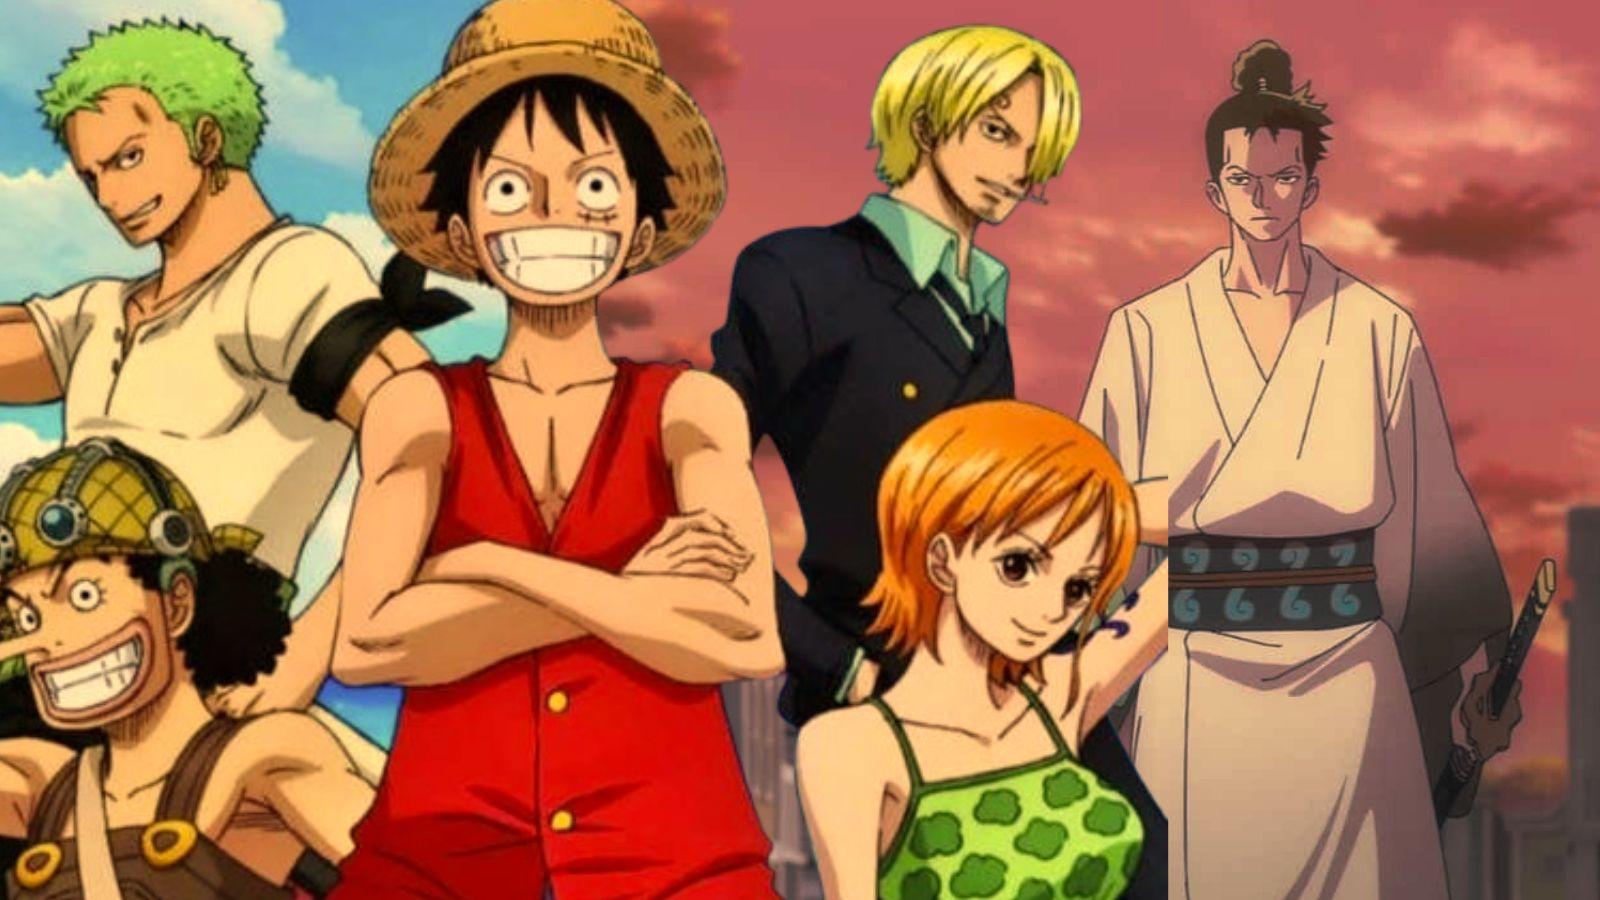 Is Monsters canon to One Piece